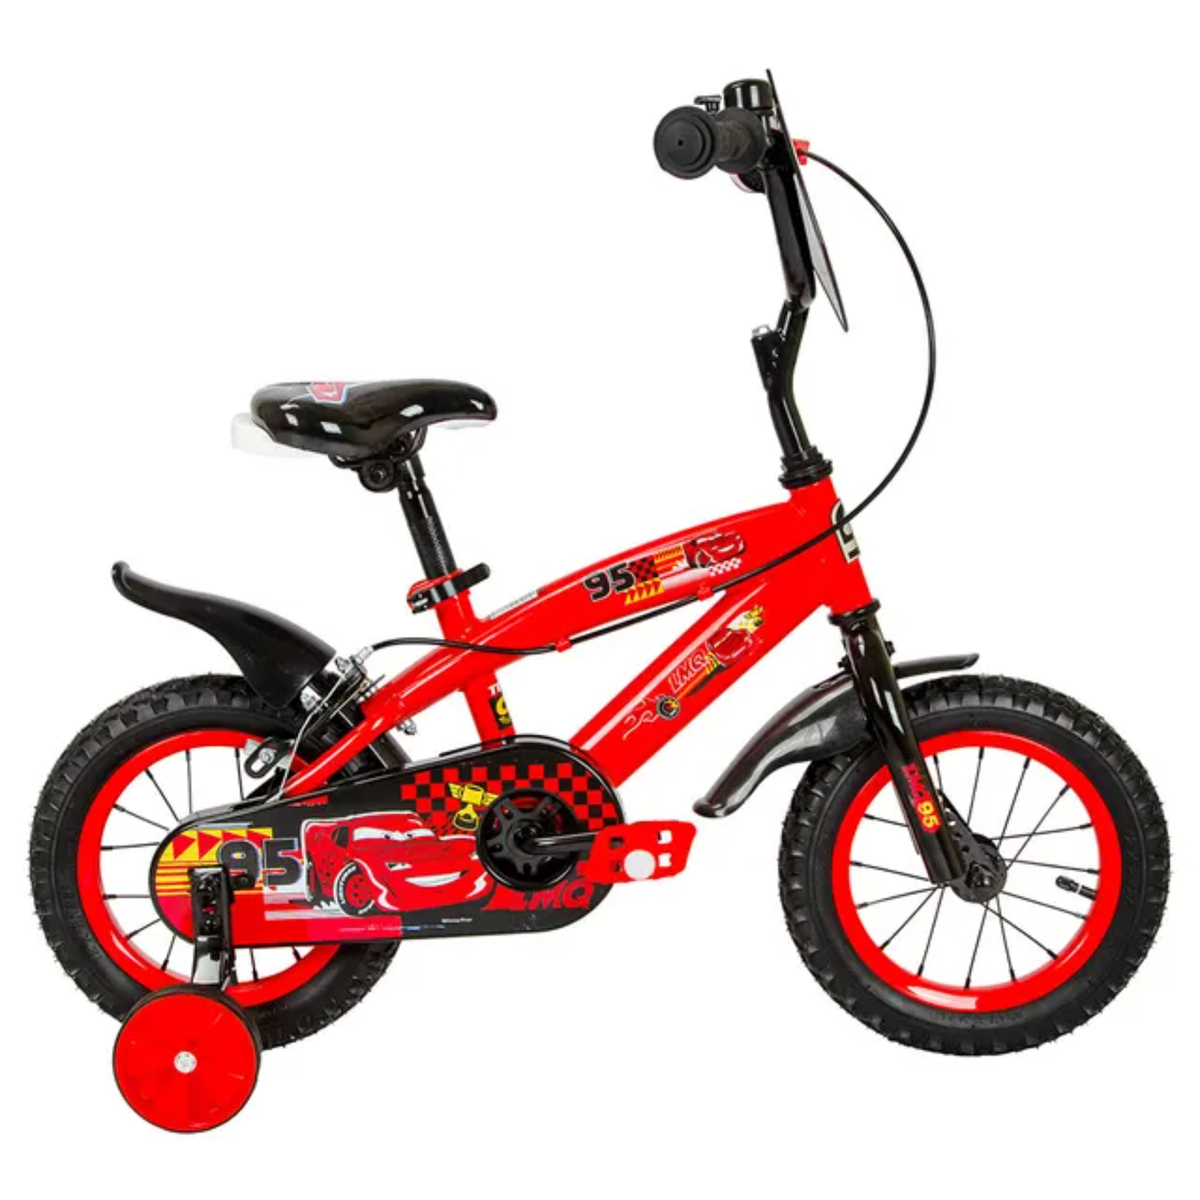 Spartan Disney Cars Bicycle - Red - 12-inch SP-3200